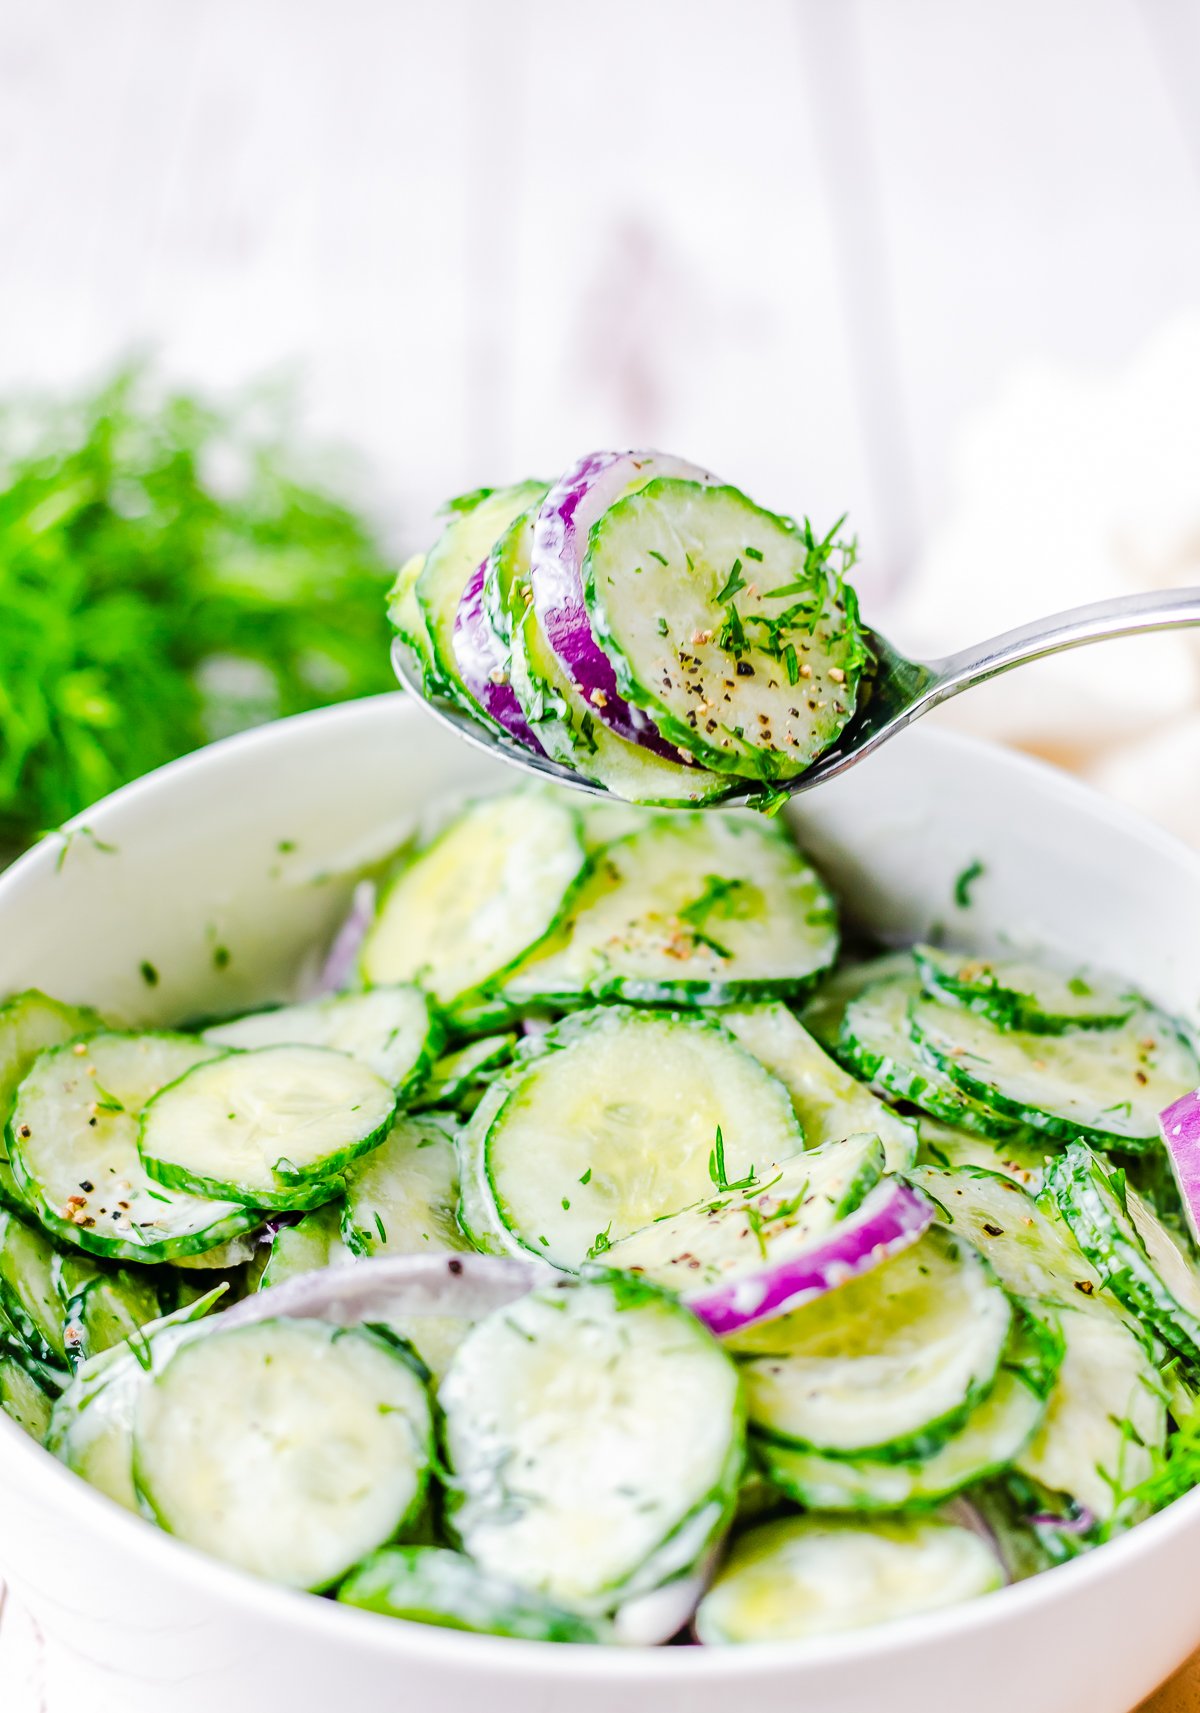 Dill Cucumber Salad being lifted up by spoon out of bowl